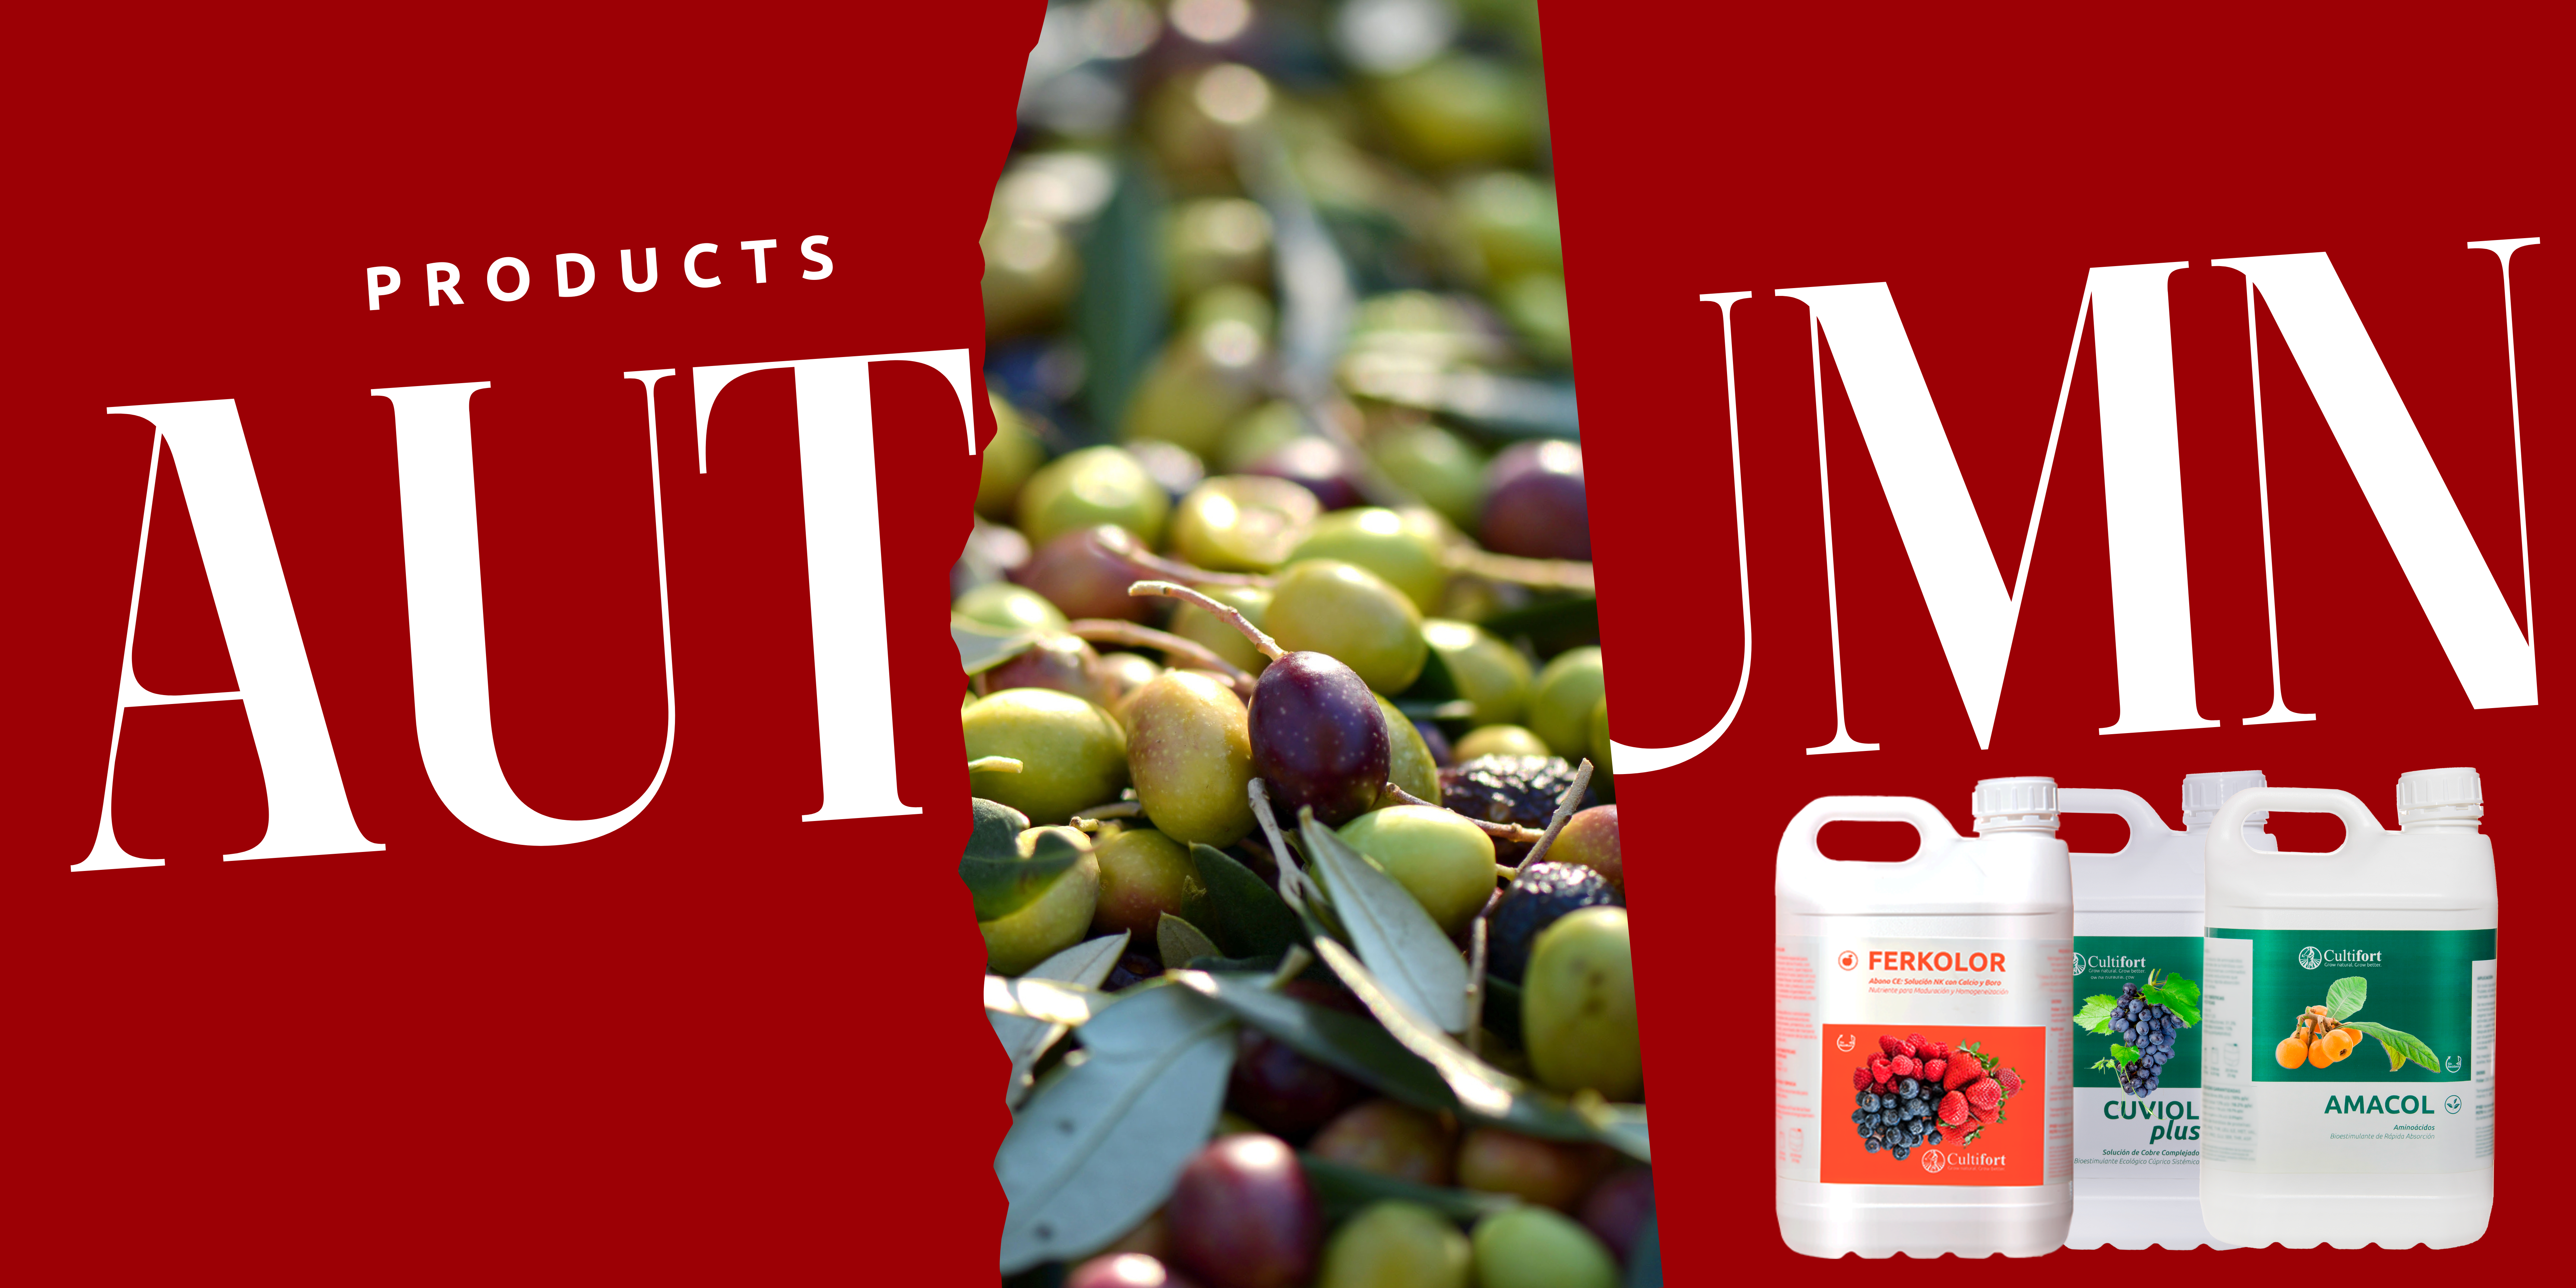 Autumn olive tree products - BANNER